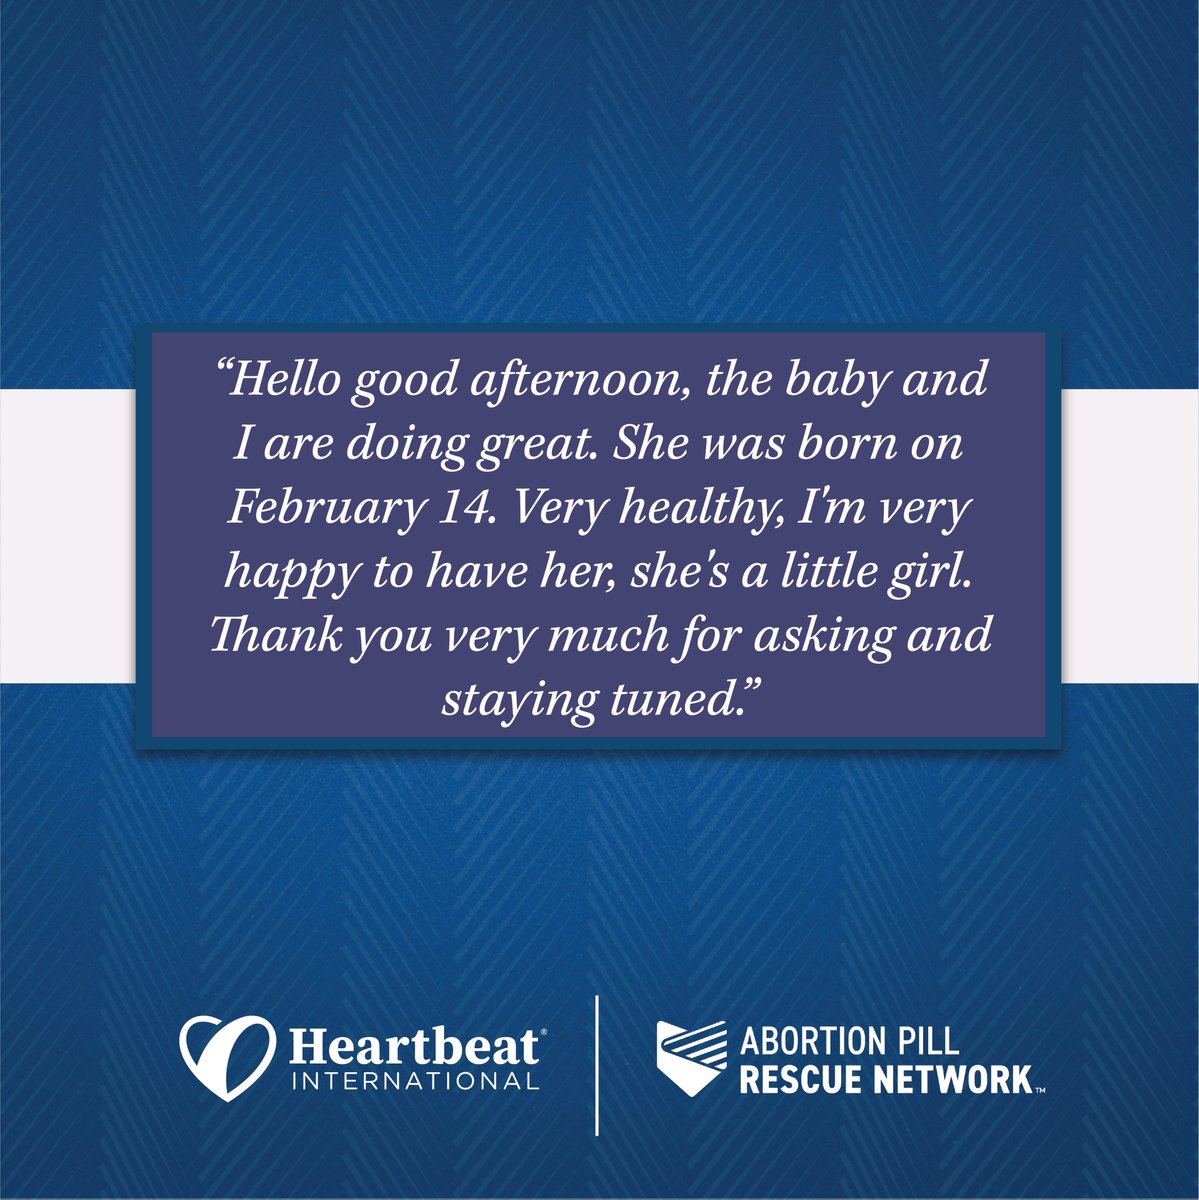 We thank Abortion Pill Rescue Network for saving lives, one heartbeat at a time.